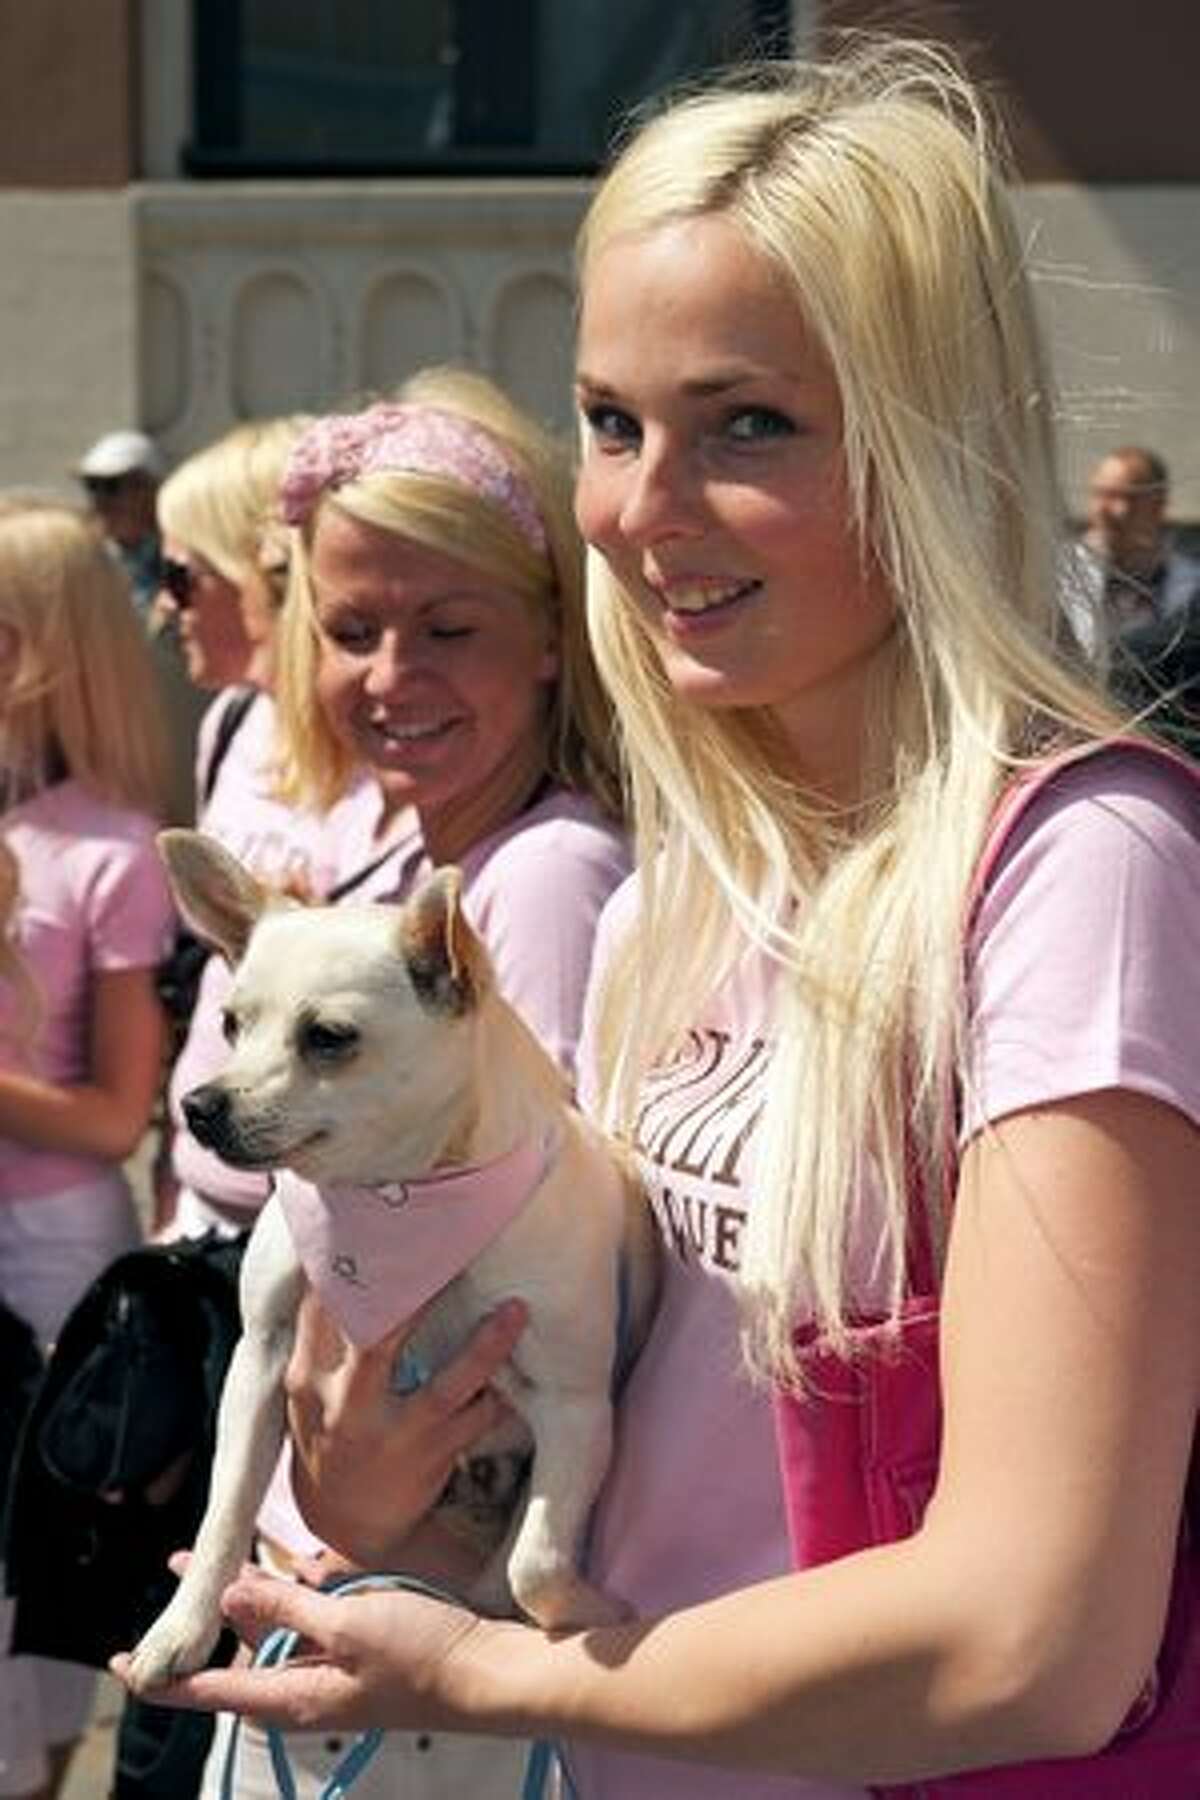 A Blond woman poses with her dog as they parade through the streets of Latvia's capital Riga during a Blond weekend.